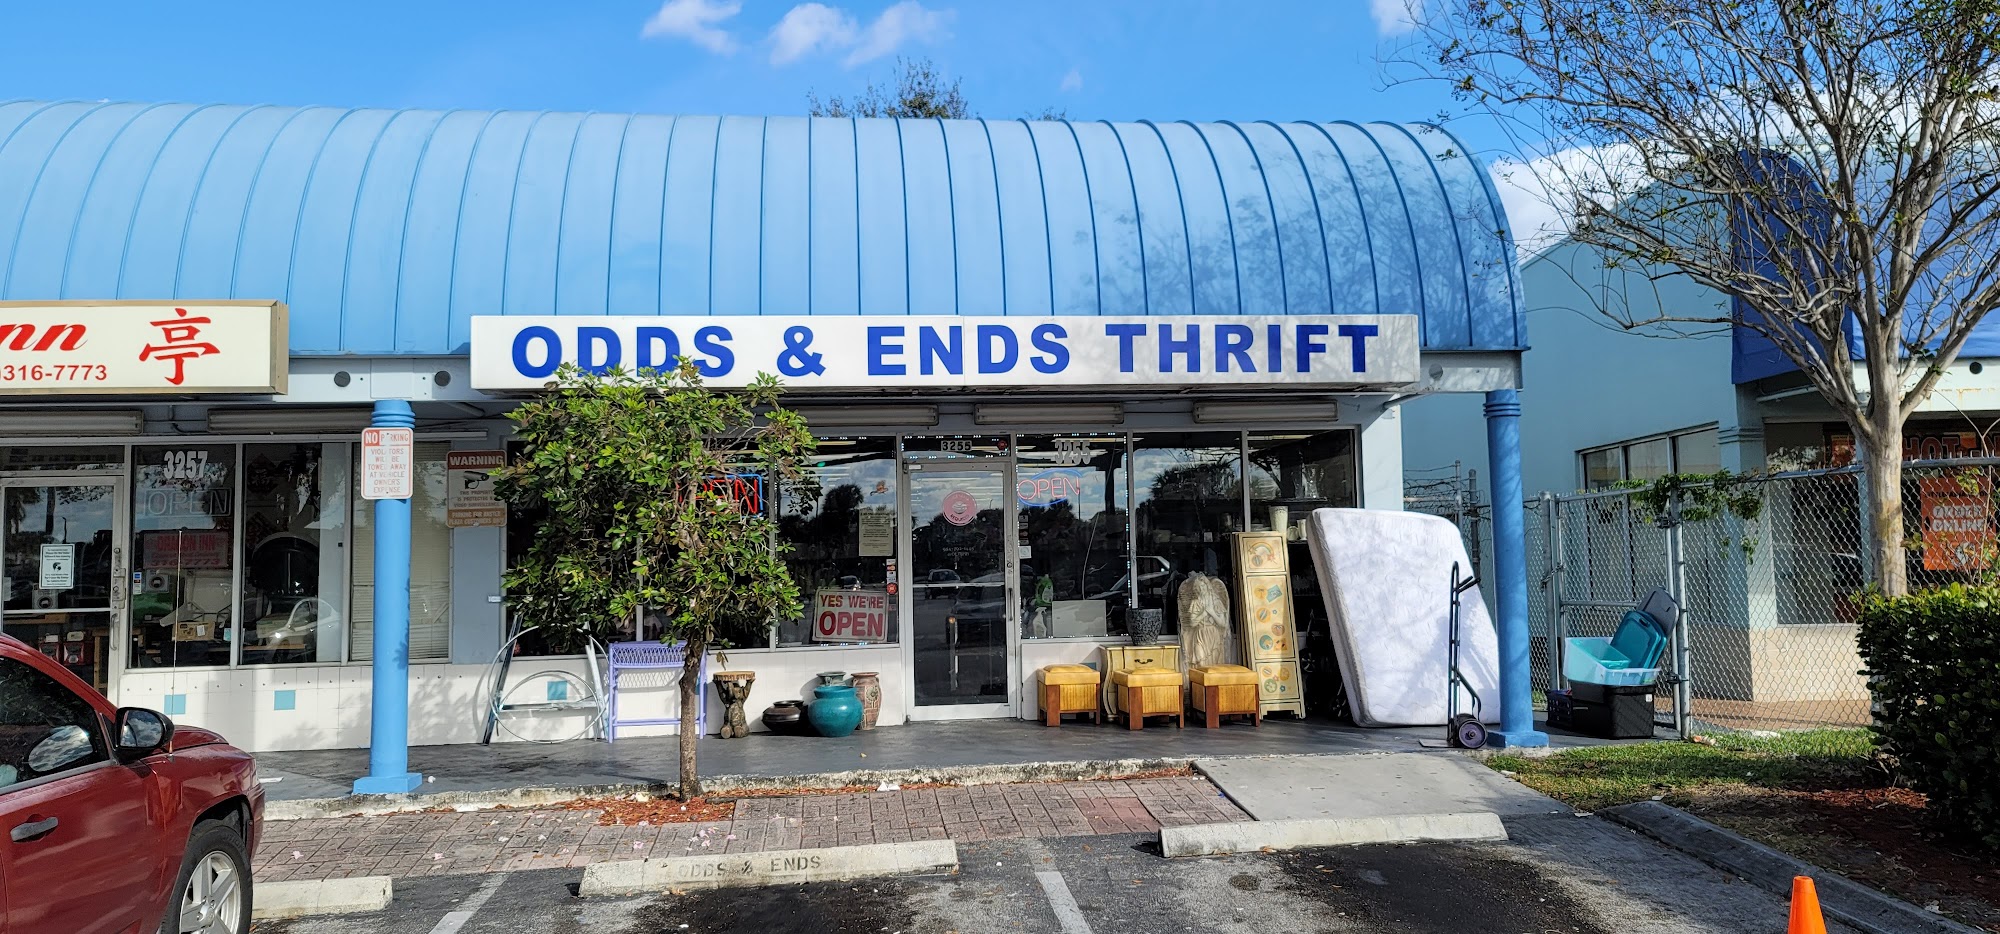 Odds and Ends Thrift Store North